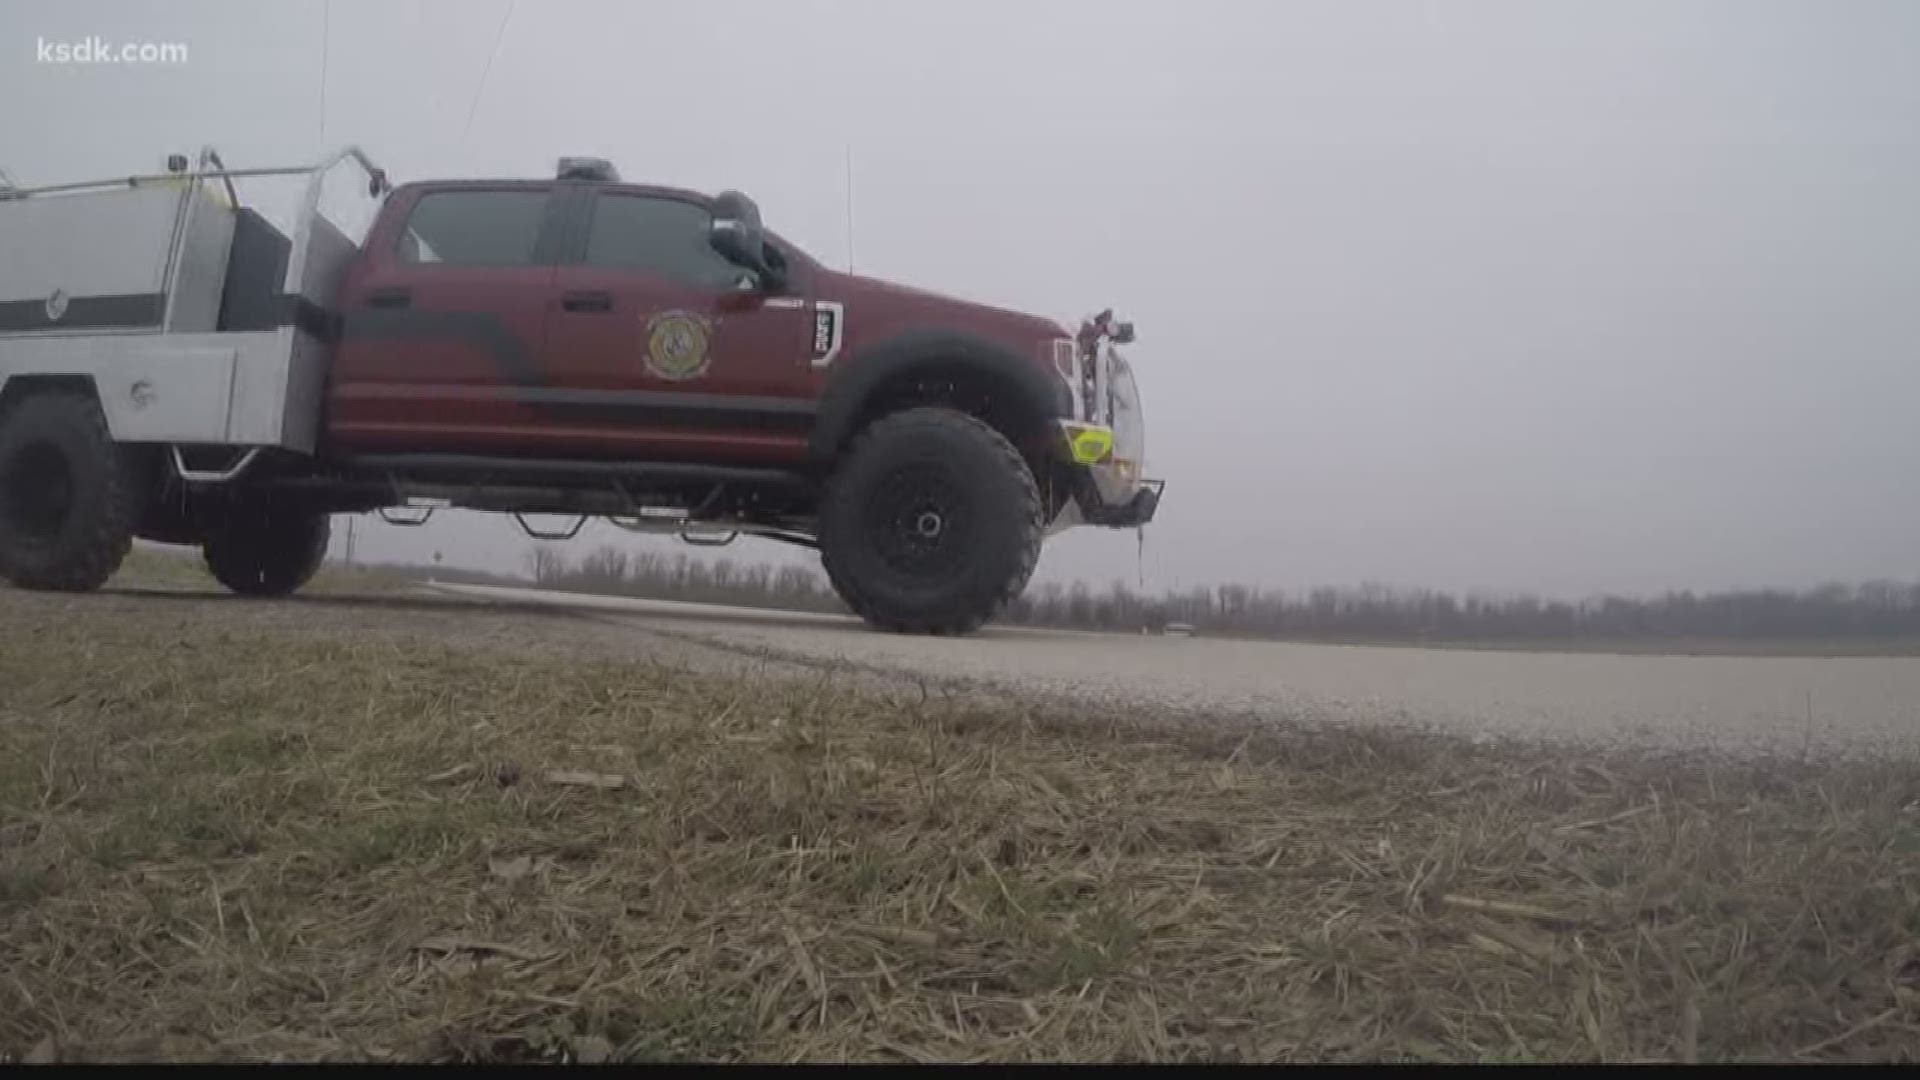 From fires, to floods and, of course, snowstorms, these trucks handle it all.